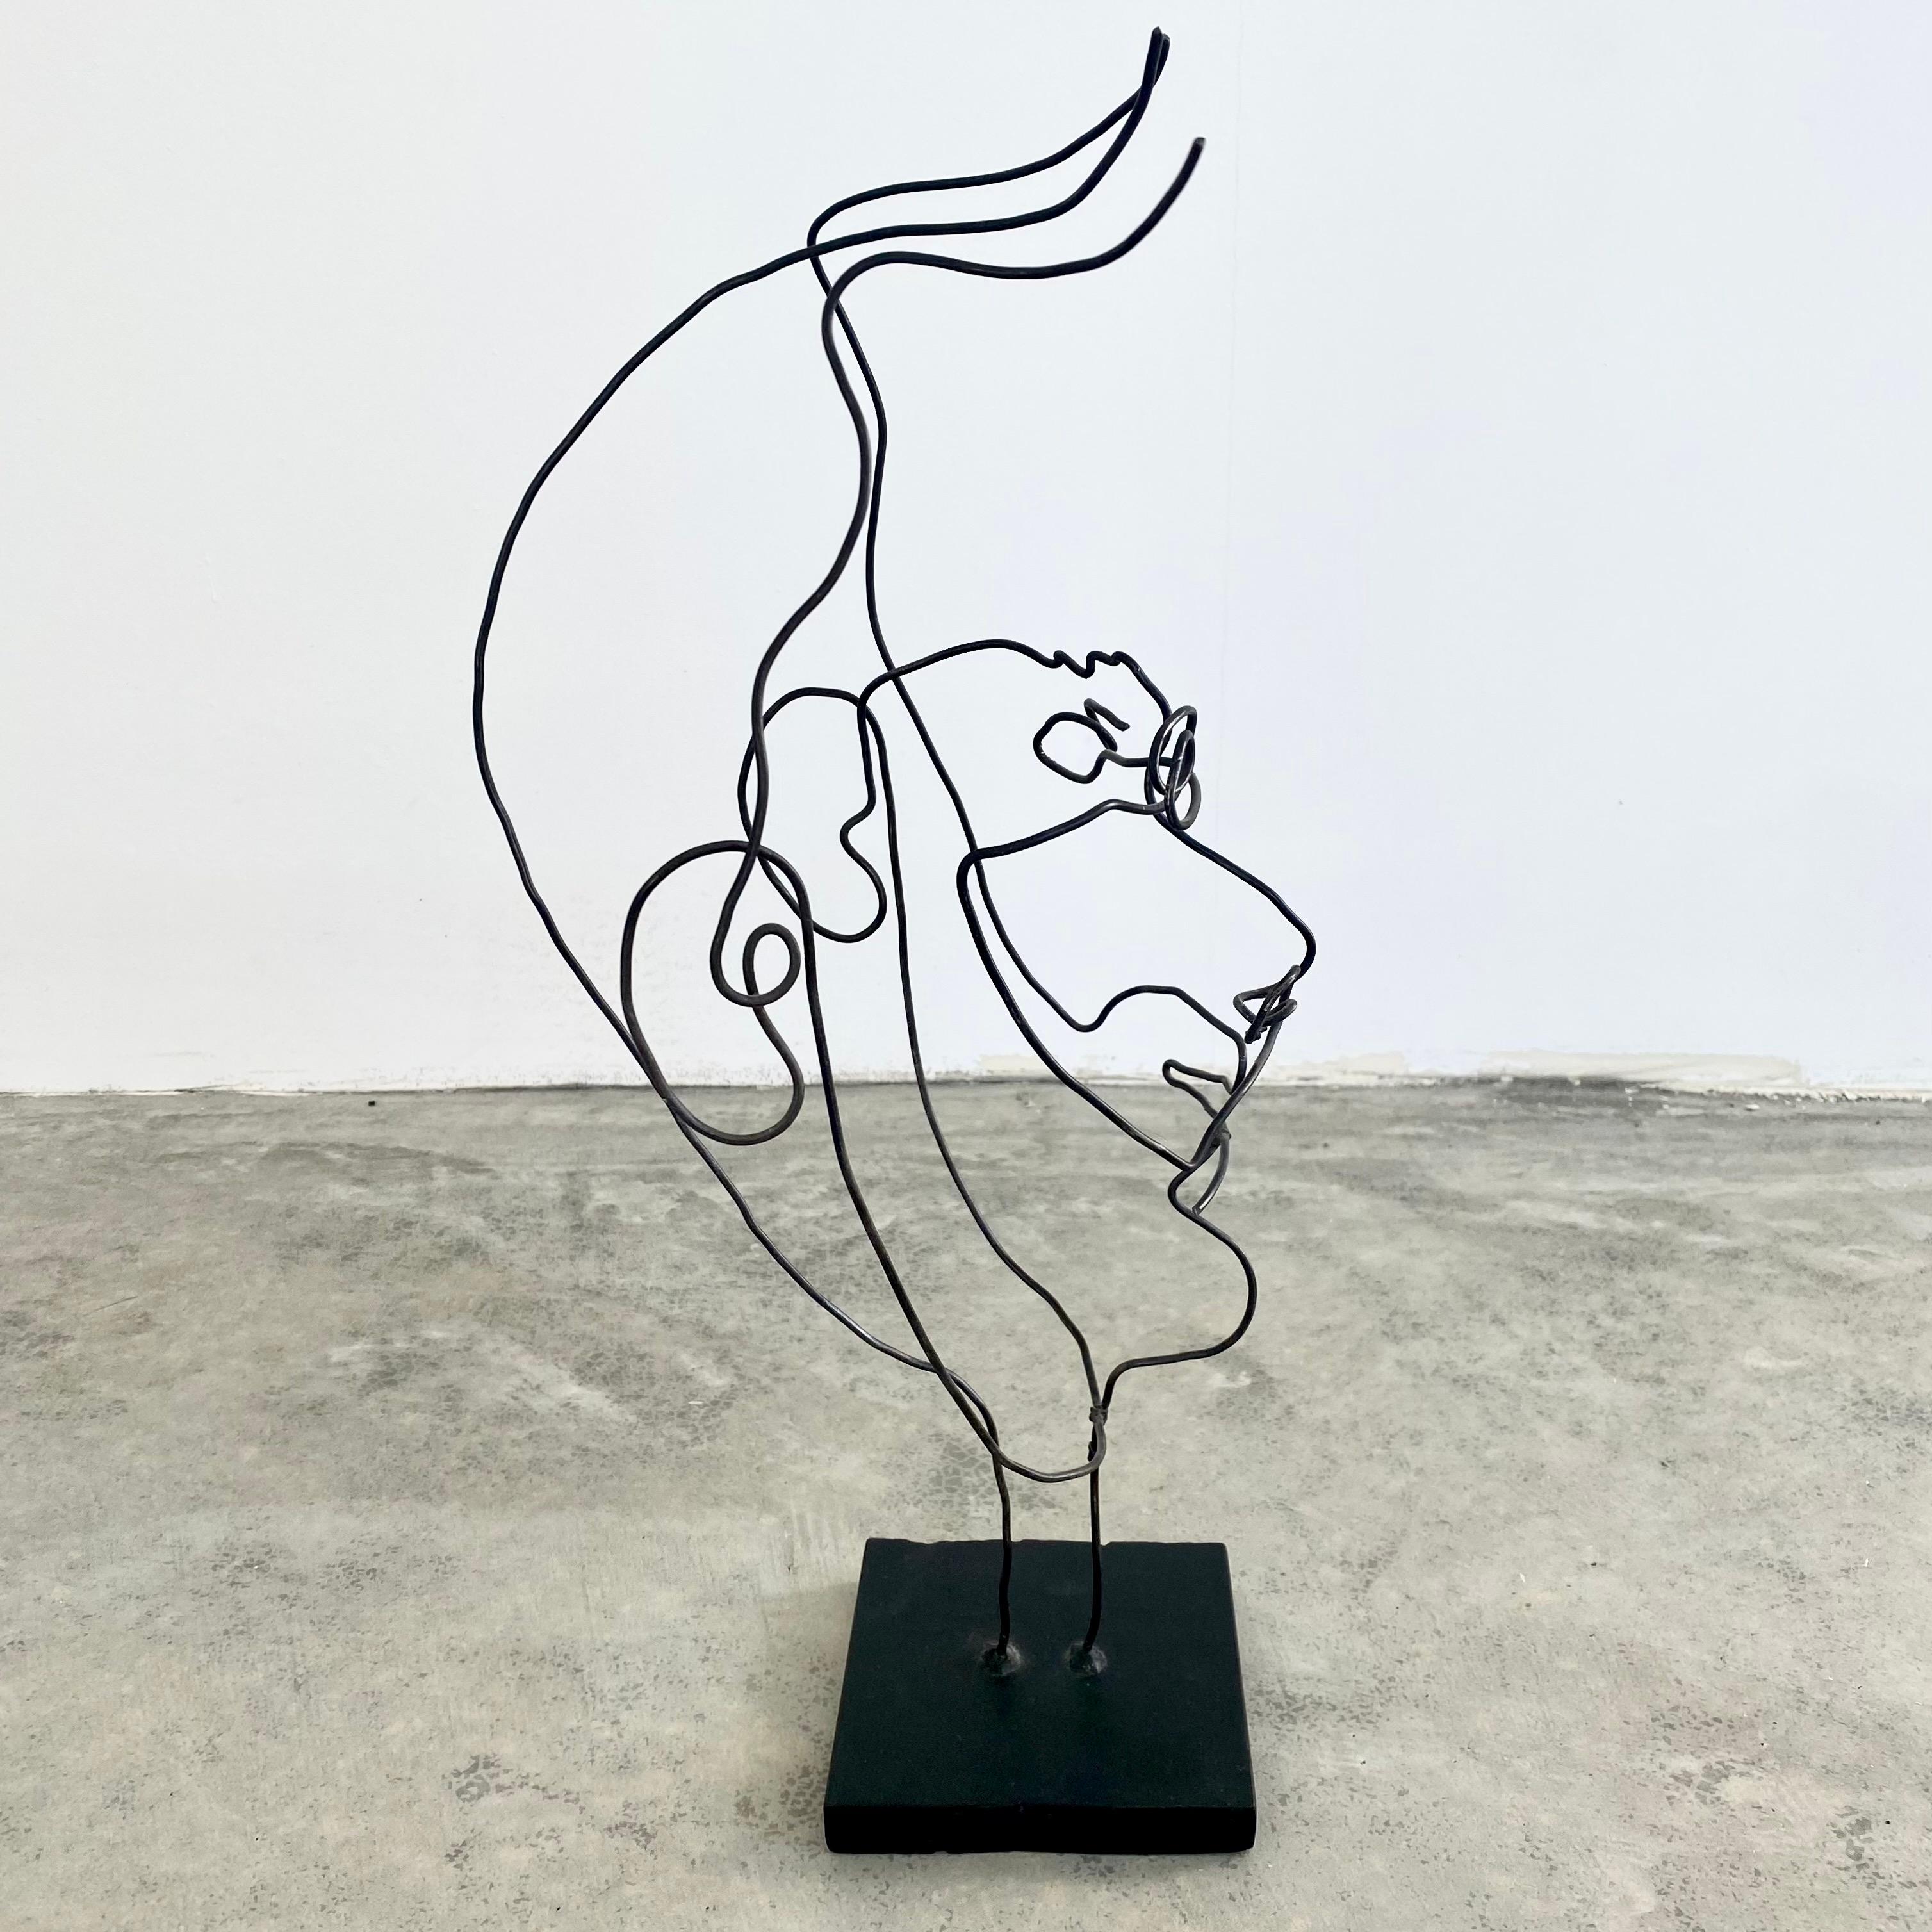 Stunning metal wire sculpture resembling a man's face. Thin metal wire is bent, molded and wrapped in order to give this piece its abstract structure and beautiful lines. Created by sculptor Mark Rane. Wire has movement to it when touched. Fun,